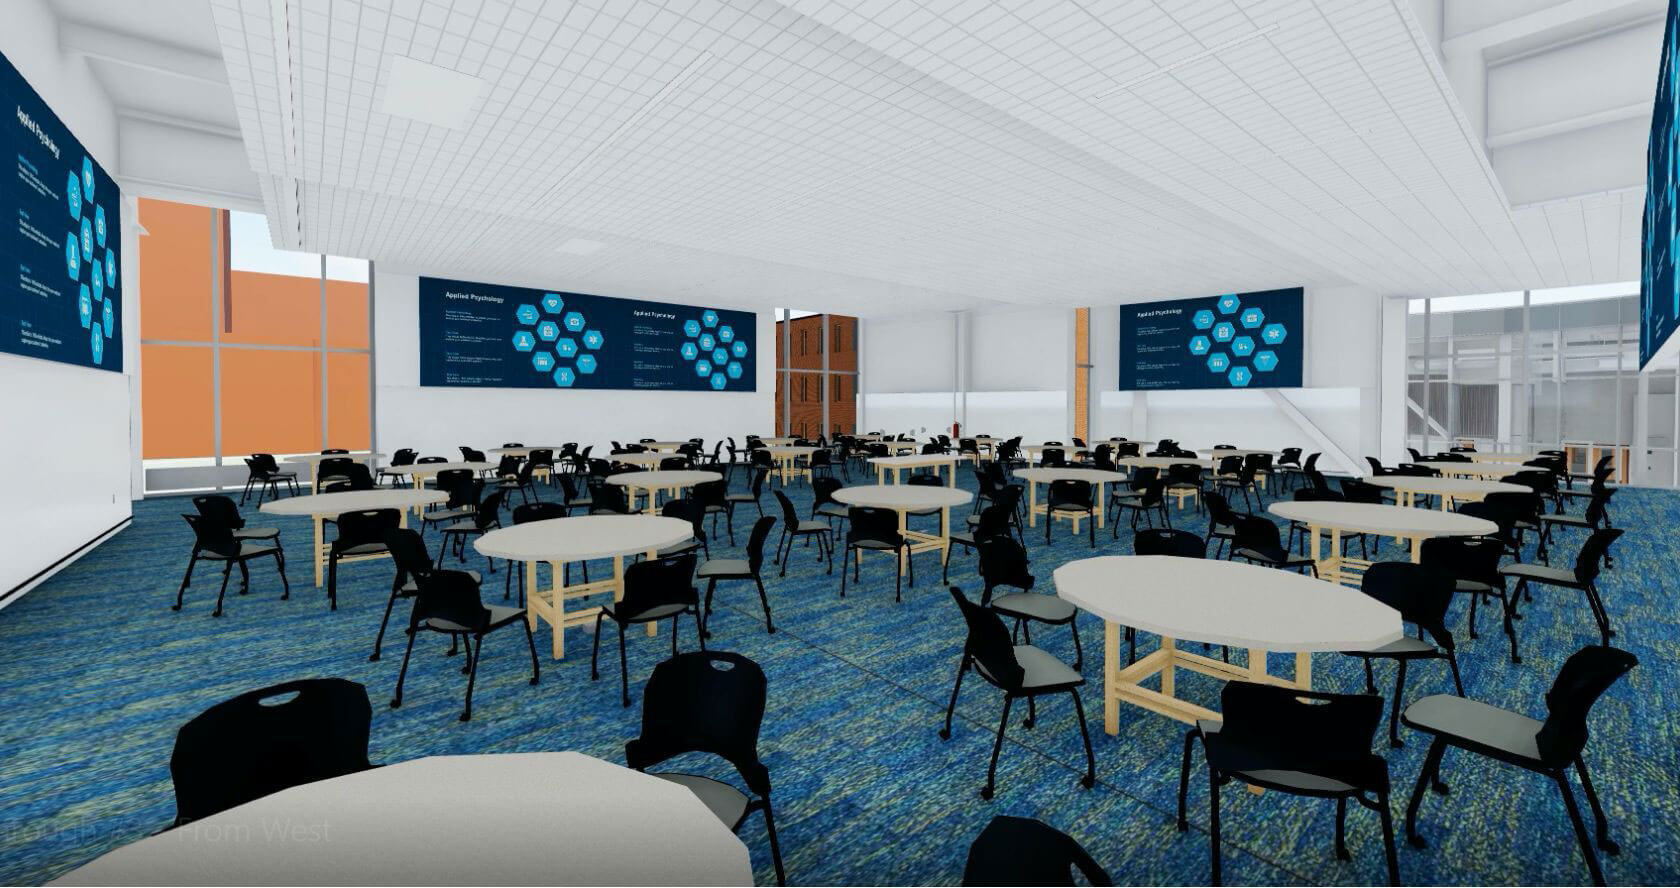 Rendering of the interior of an active classroom in the SHED.